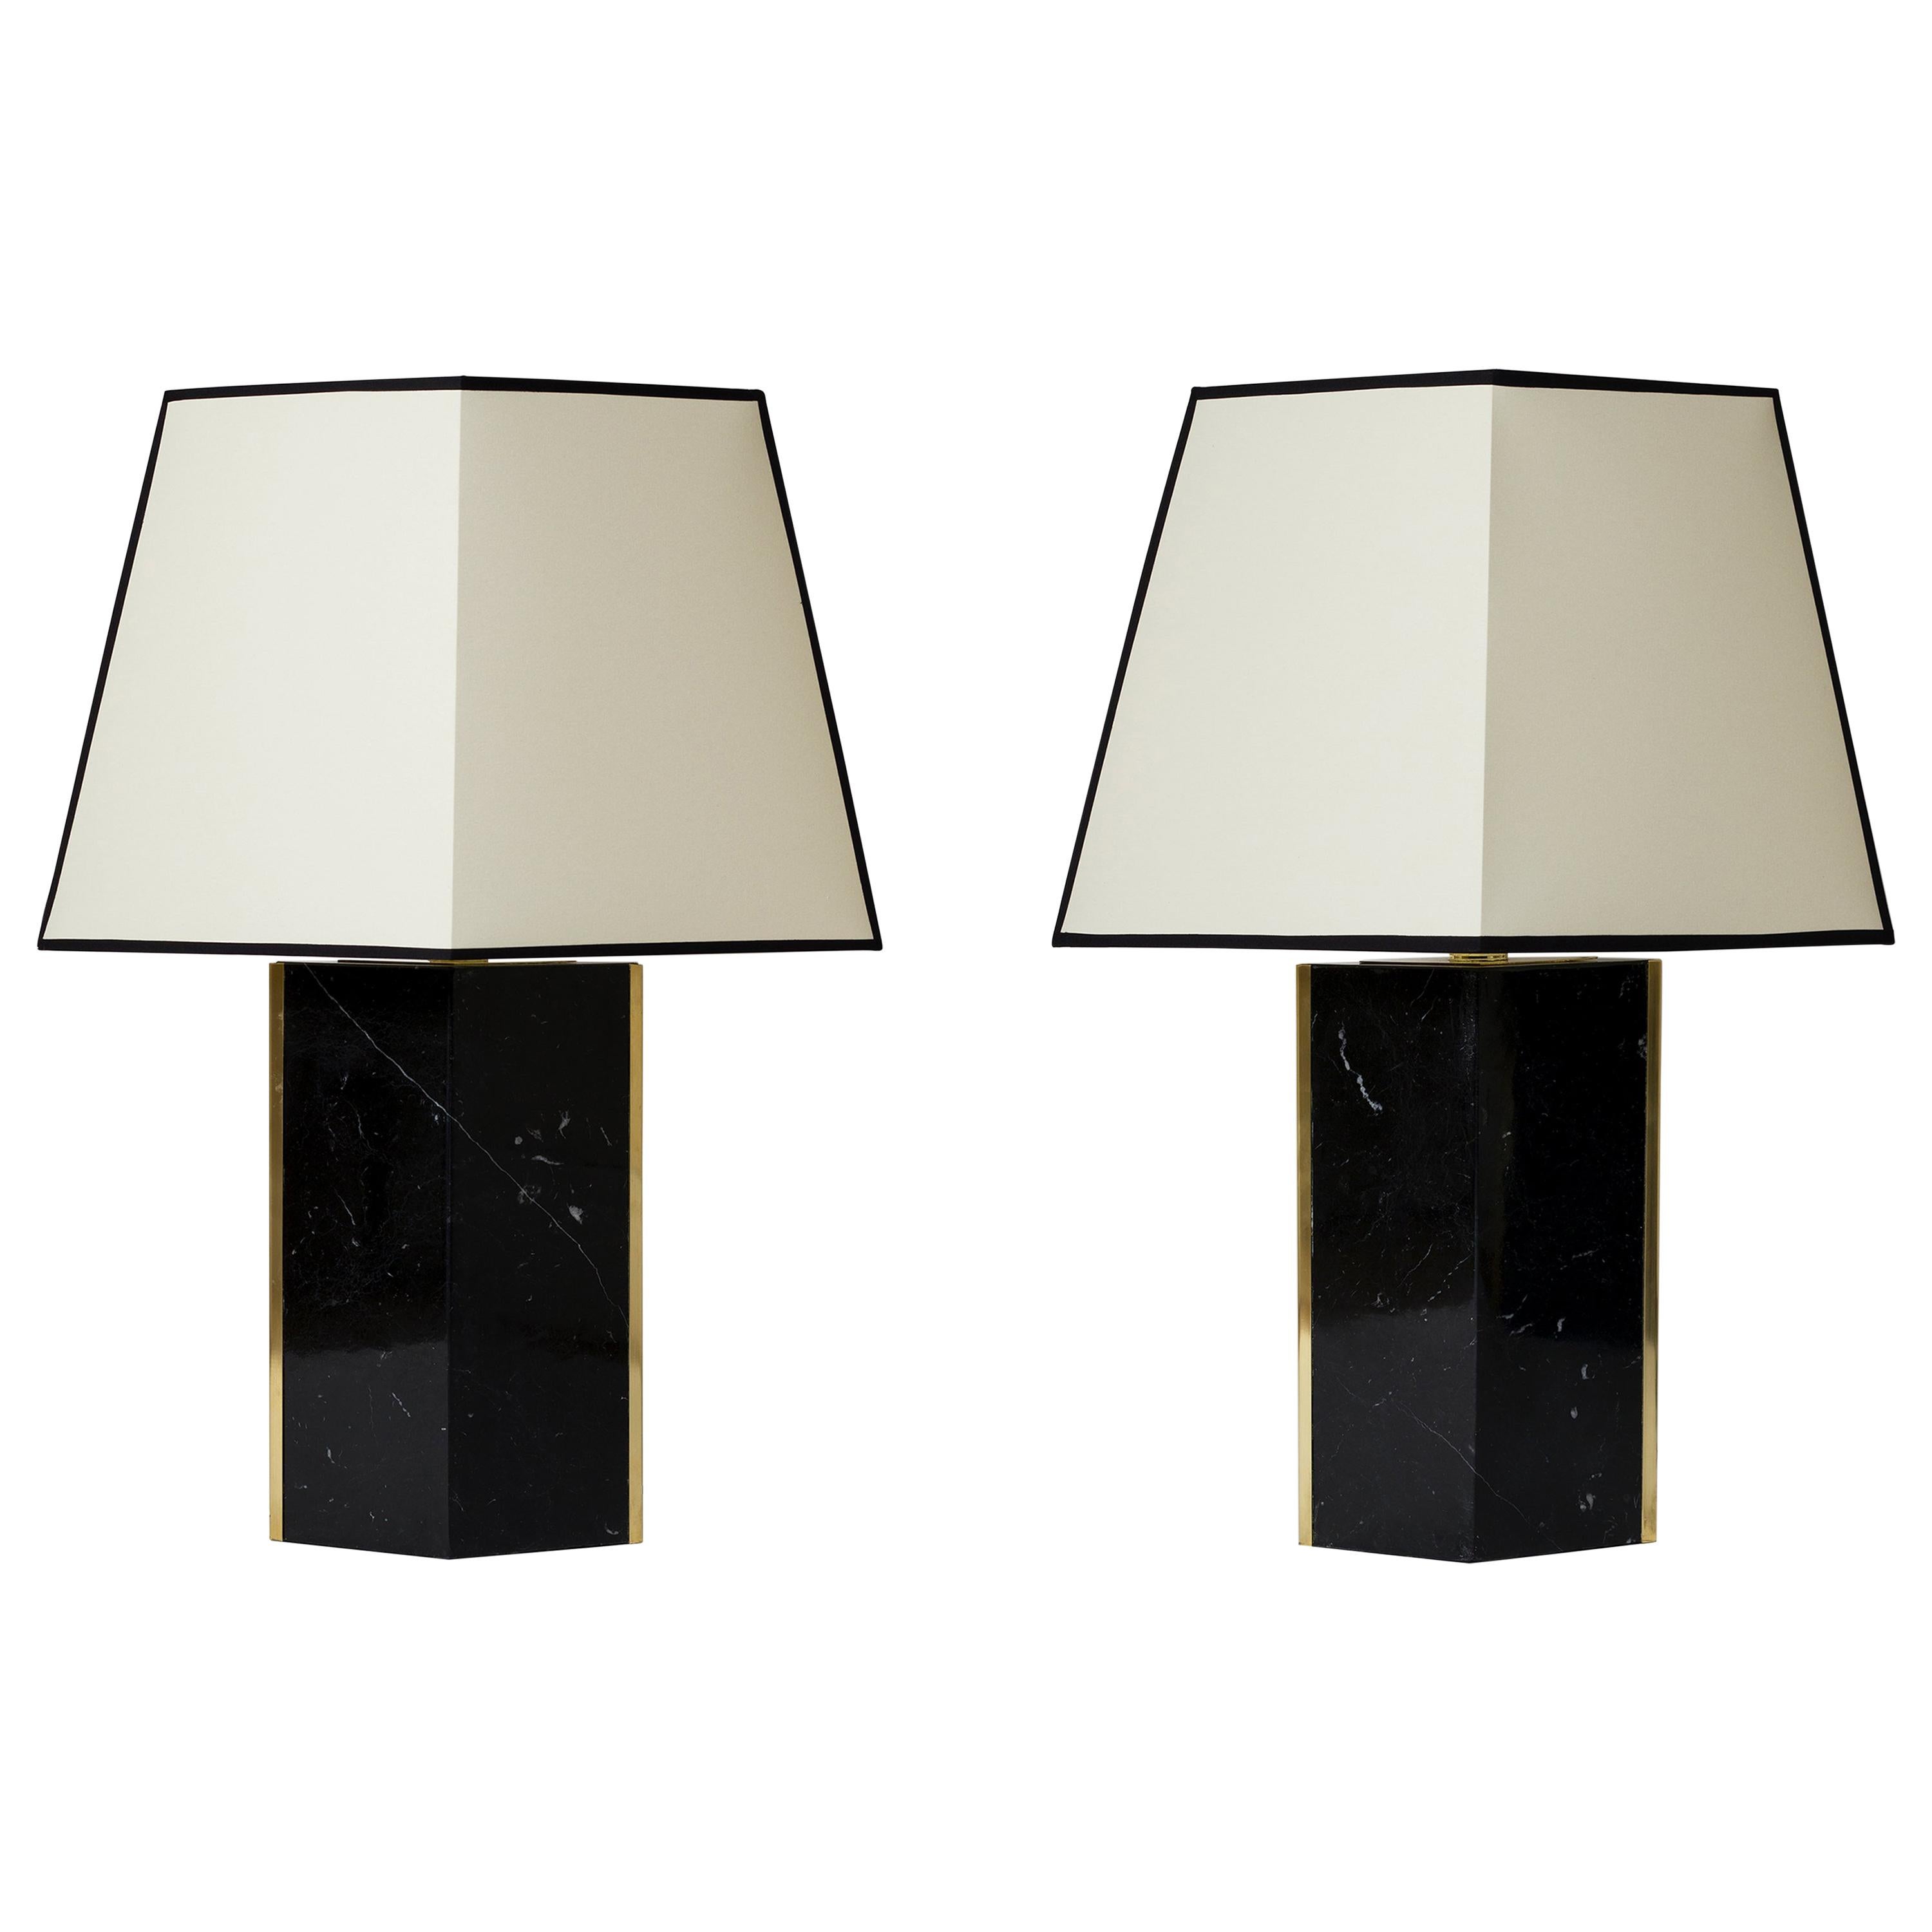 Pair of Black Marble and Brass Table Lamp, by Dorian Caffot de Fawes